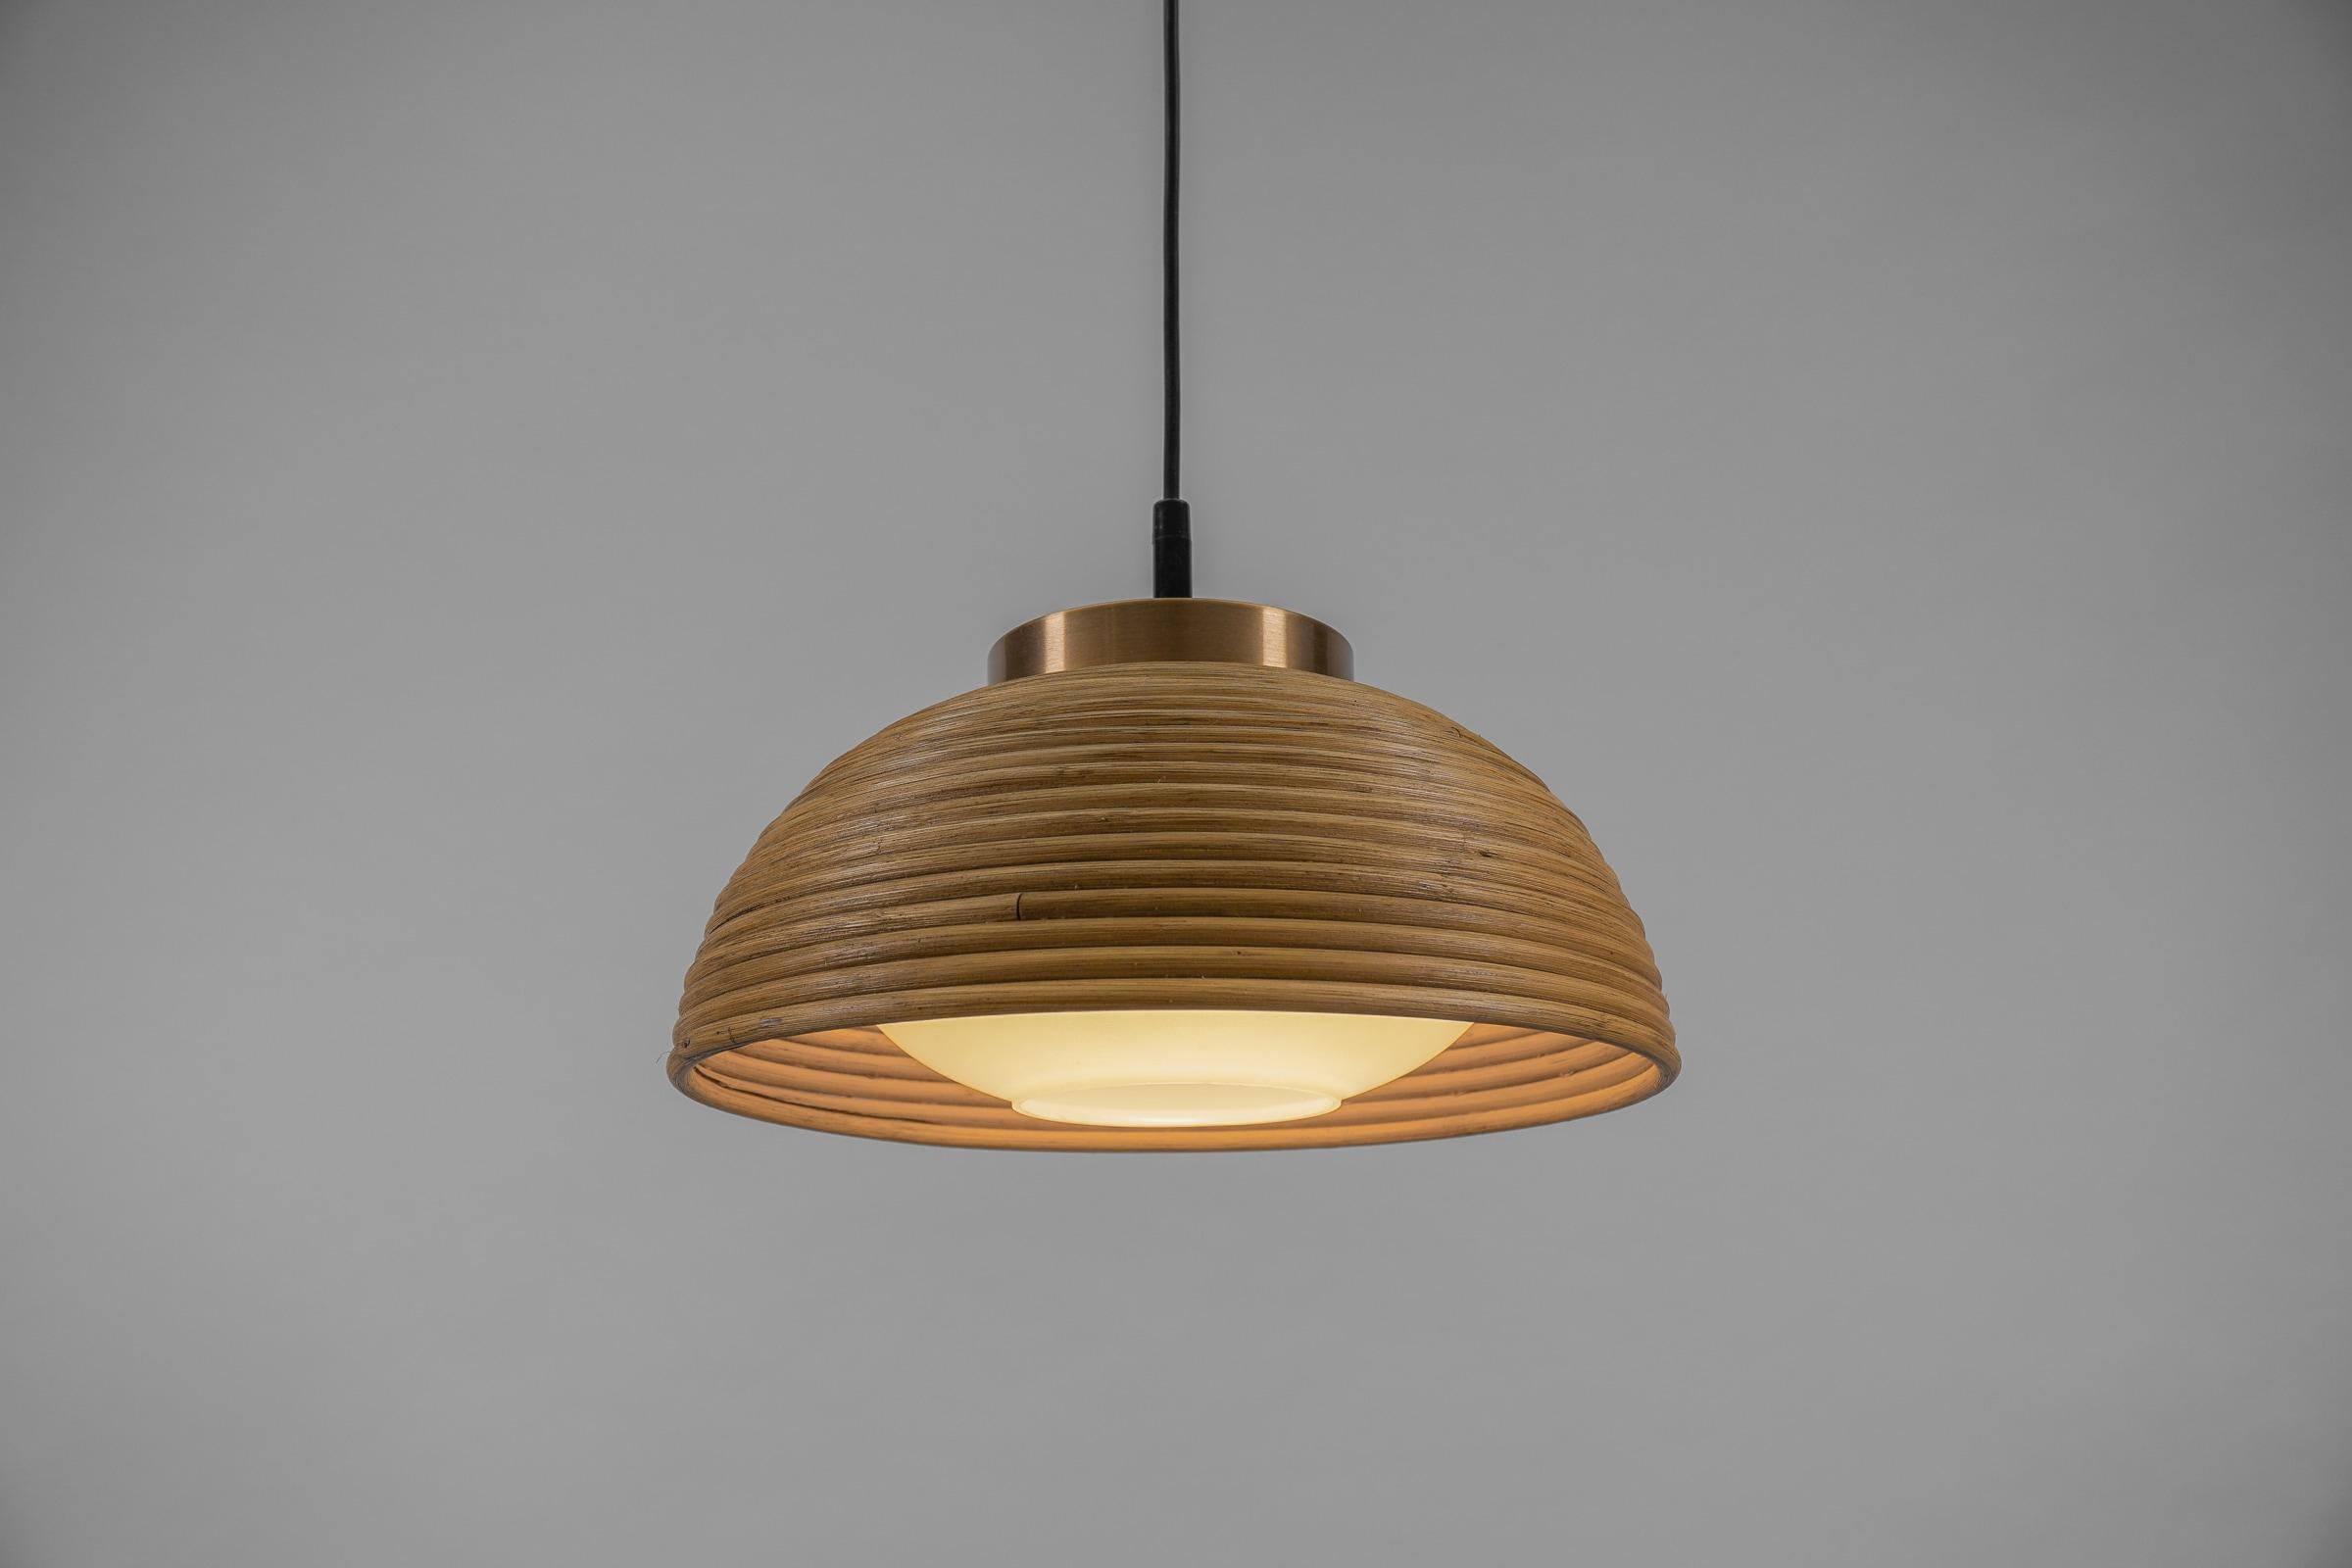 Scandinavian Lovely Mid-Century Modern Pendant Light made in Rattan, Glass and Copper , 1960s For Sale